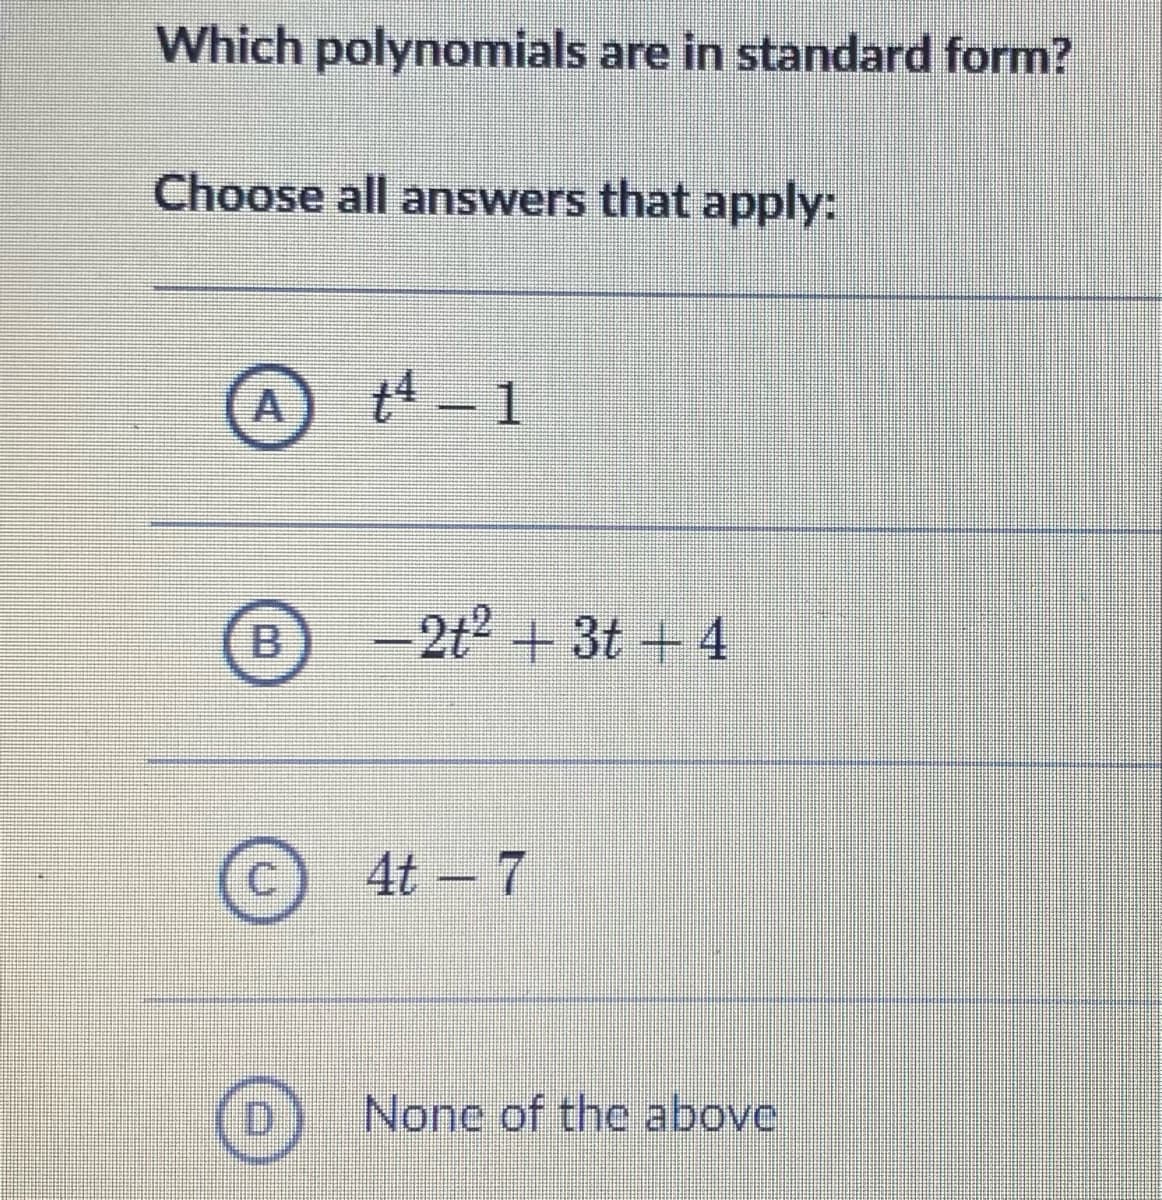 Which polynomials are in standard form?
Choose all answers that apply:
O
+4
t4 – 1
−2t² + 3t+4
4t - 7
None of the above